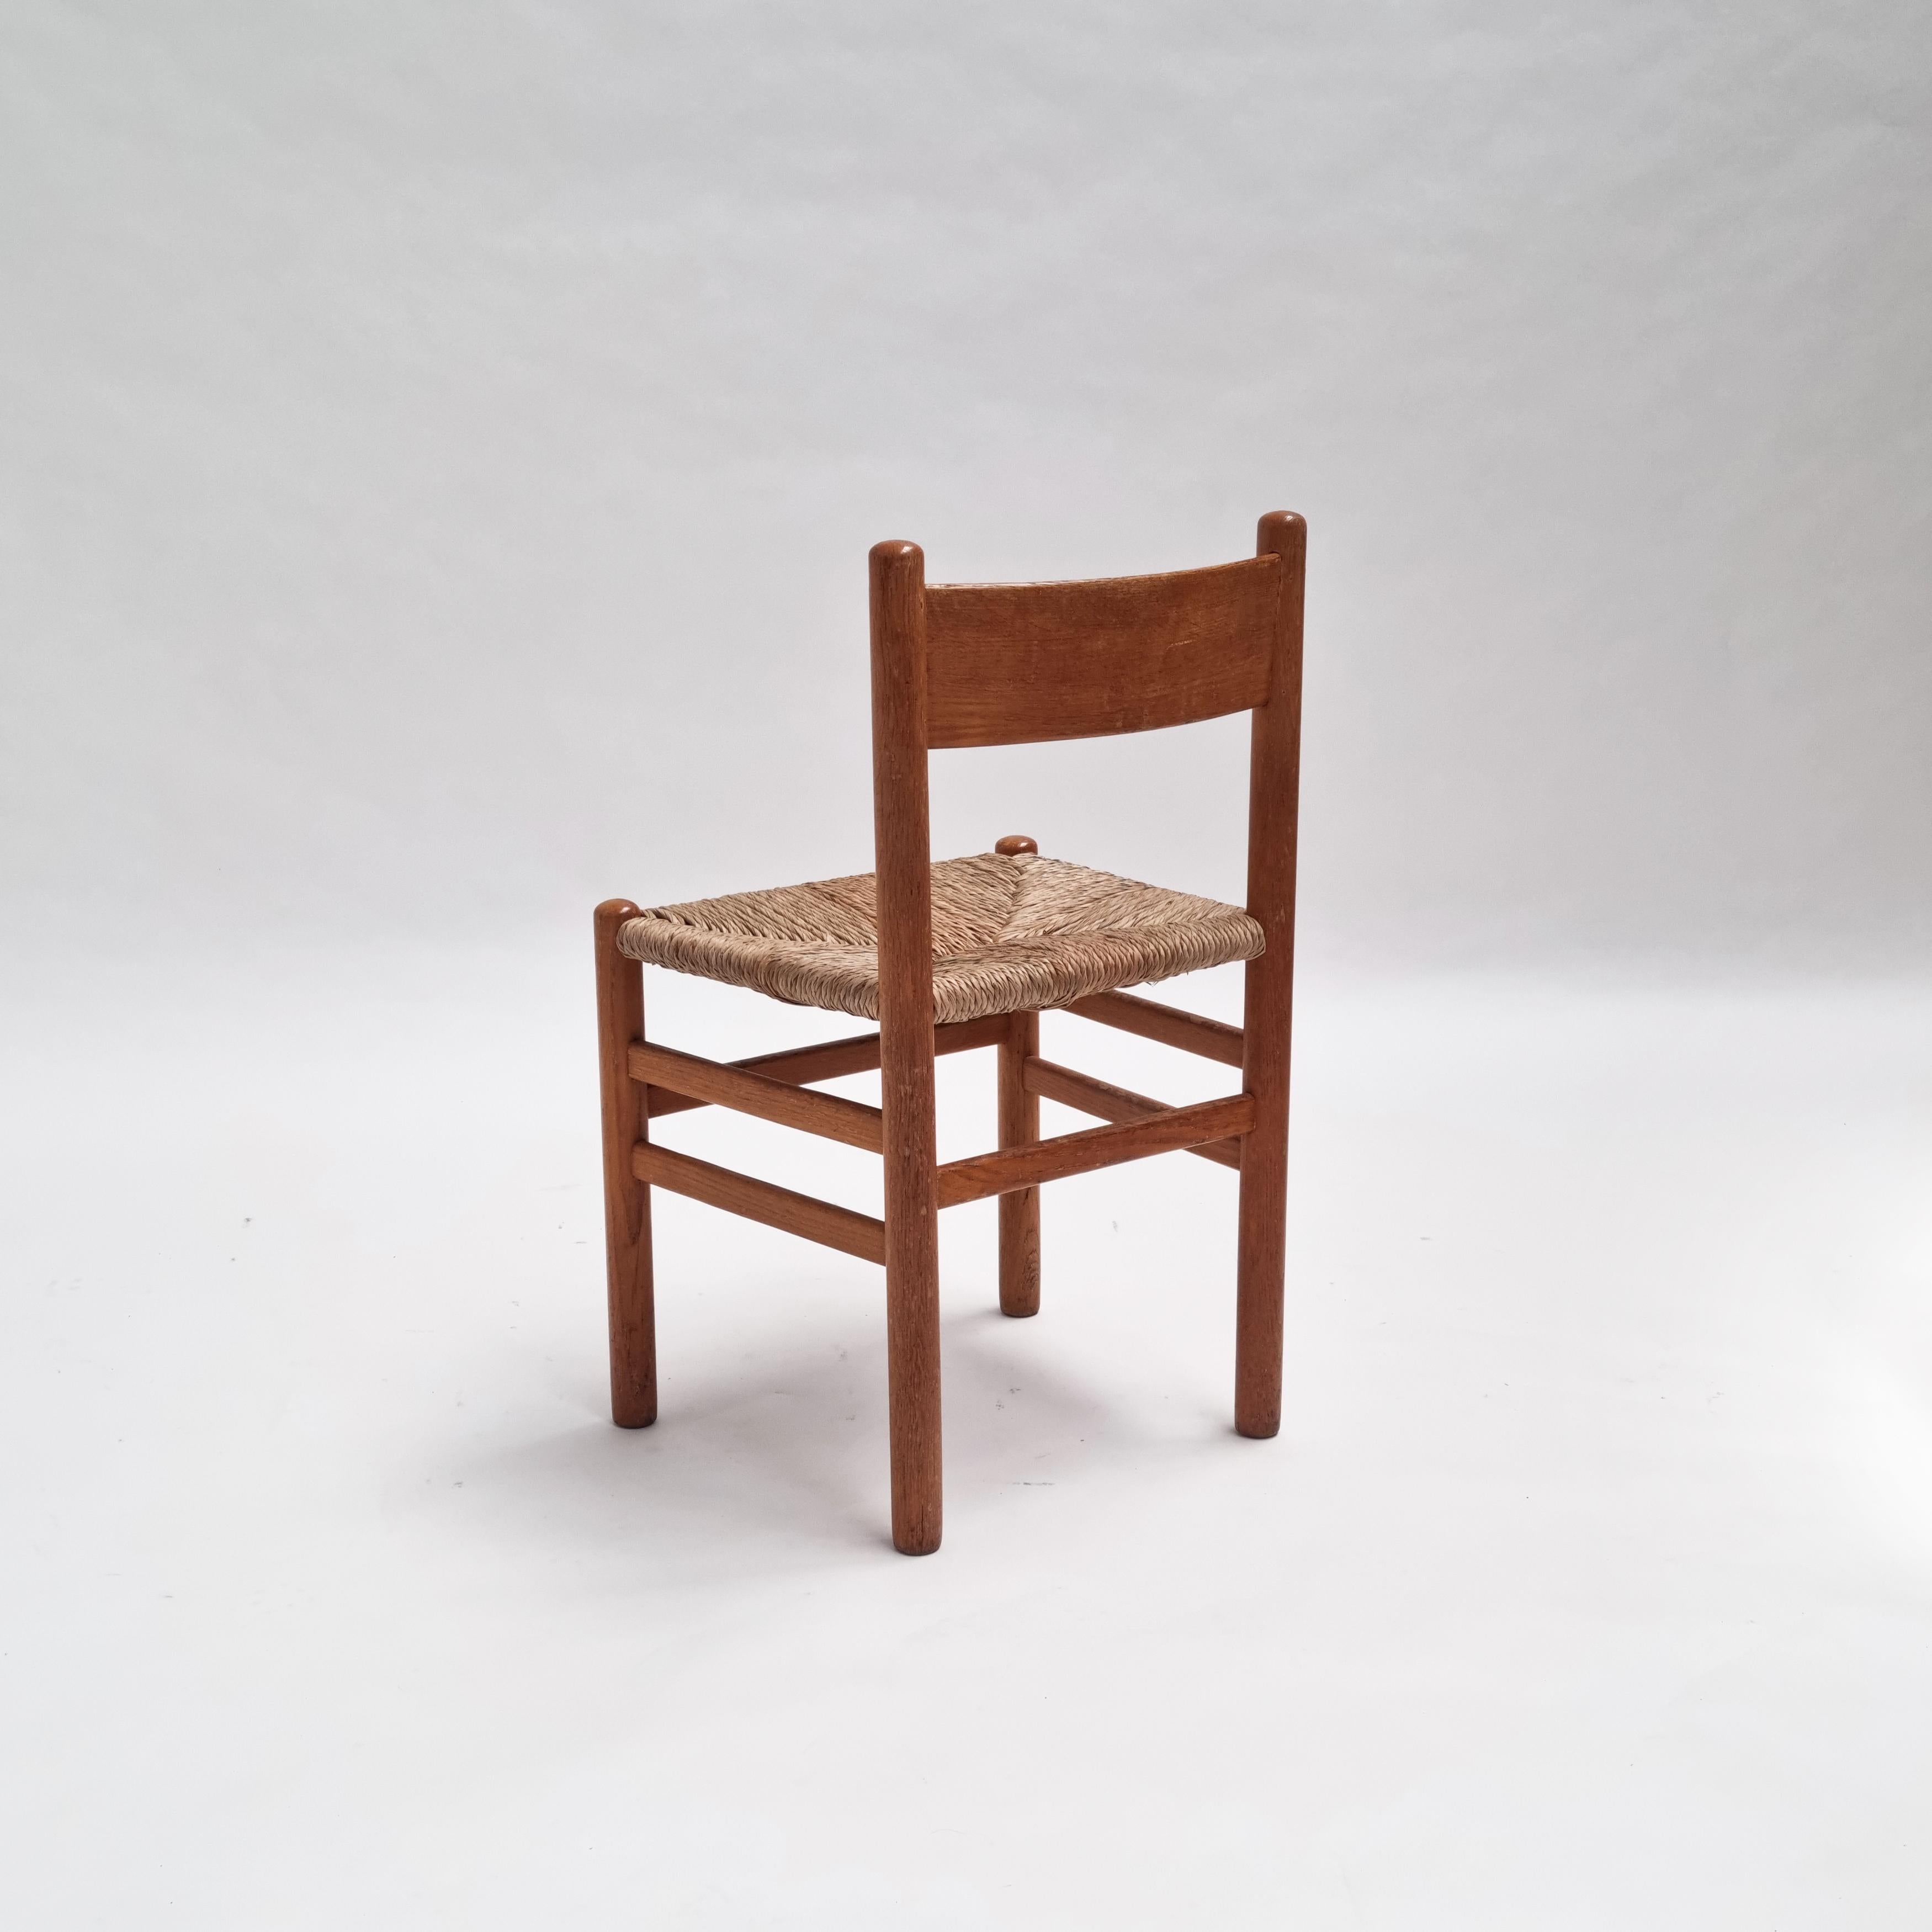 Set of 4 dining chairs designed by Johan van Heuvel around 1965 for his own company Ad Vorm.
Johan van Heuvel had his own design studio and designed many different things, not only furniture. These chairs are made in very small and limited numbers.